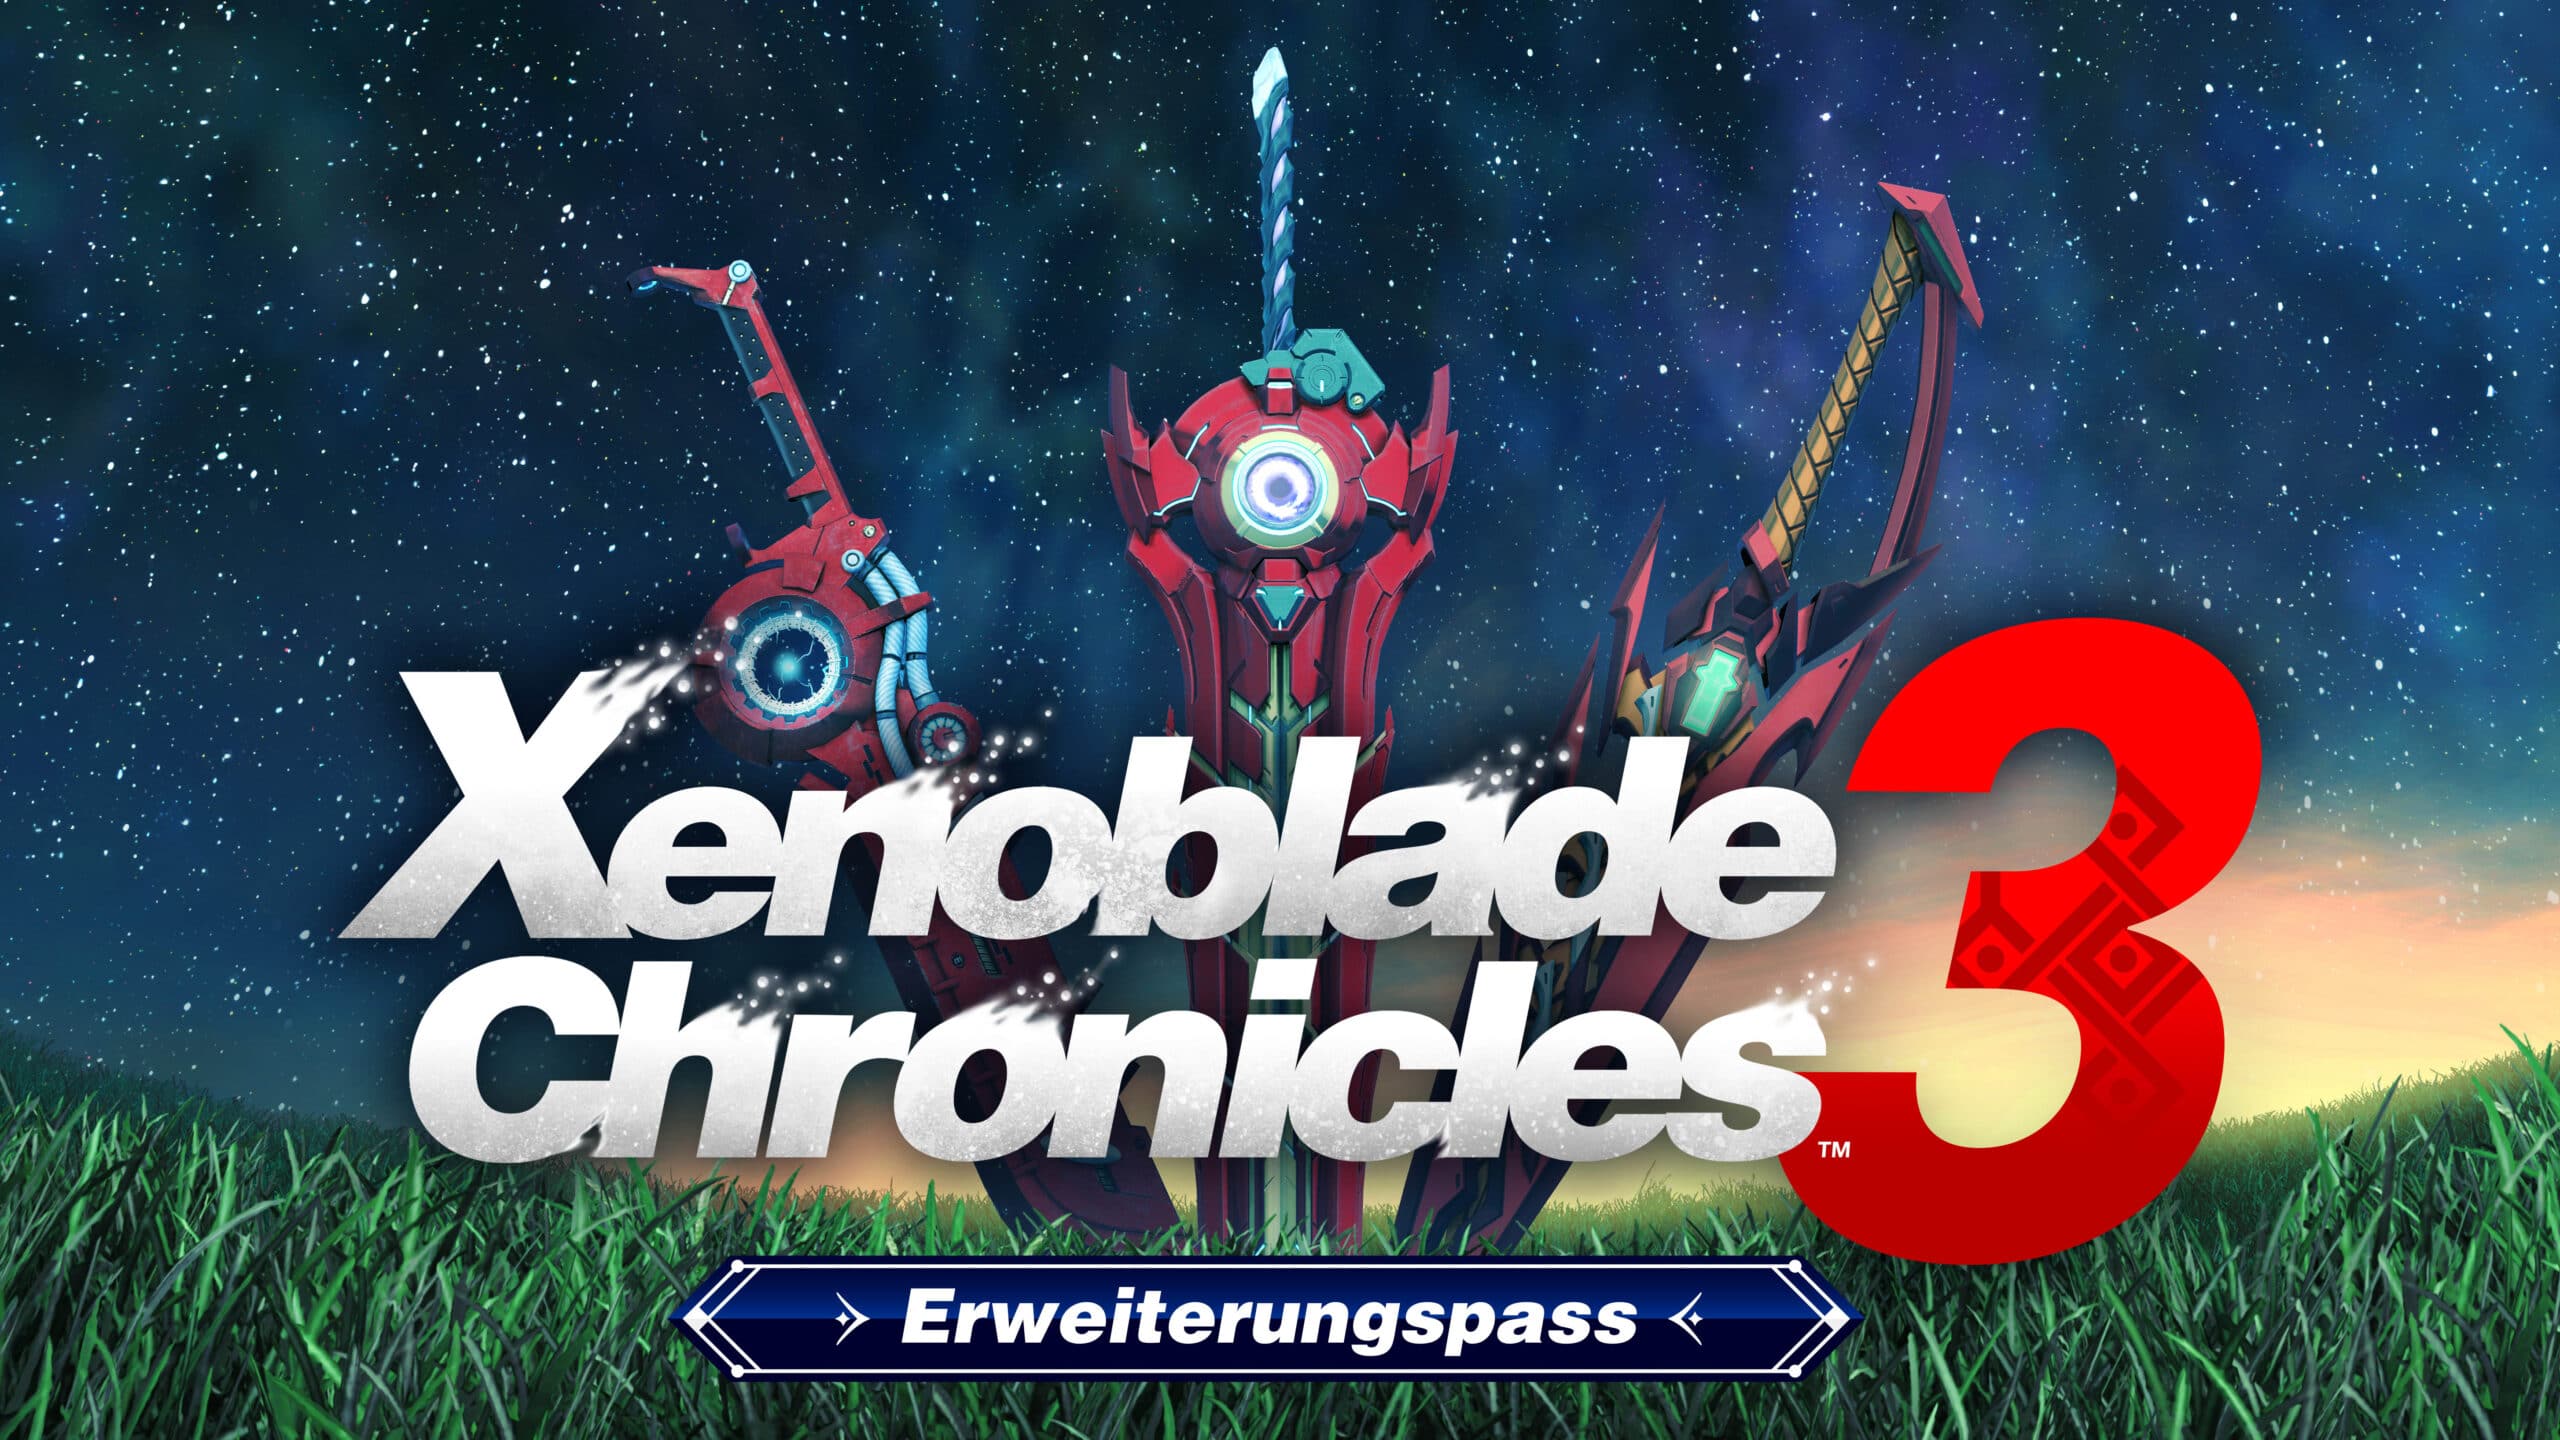 Xenoblade Chronicles 3: Direct reveals tons of new details